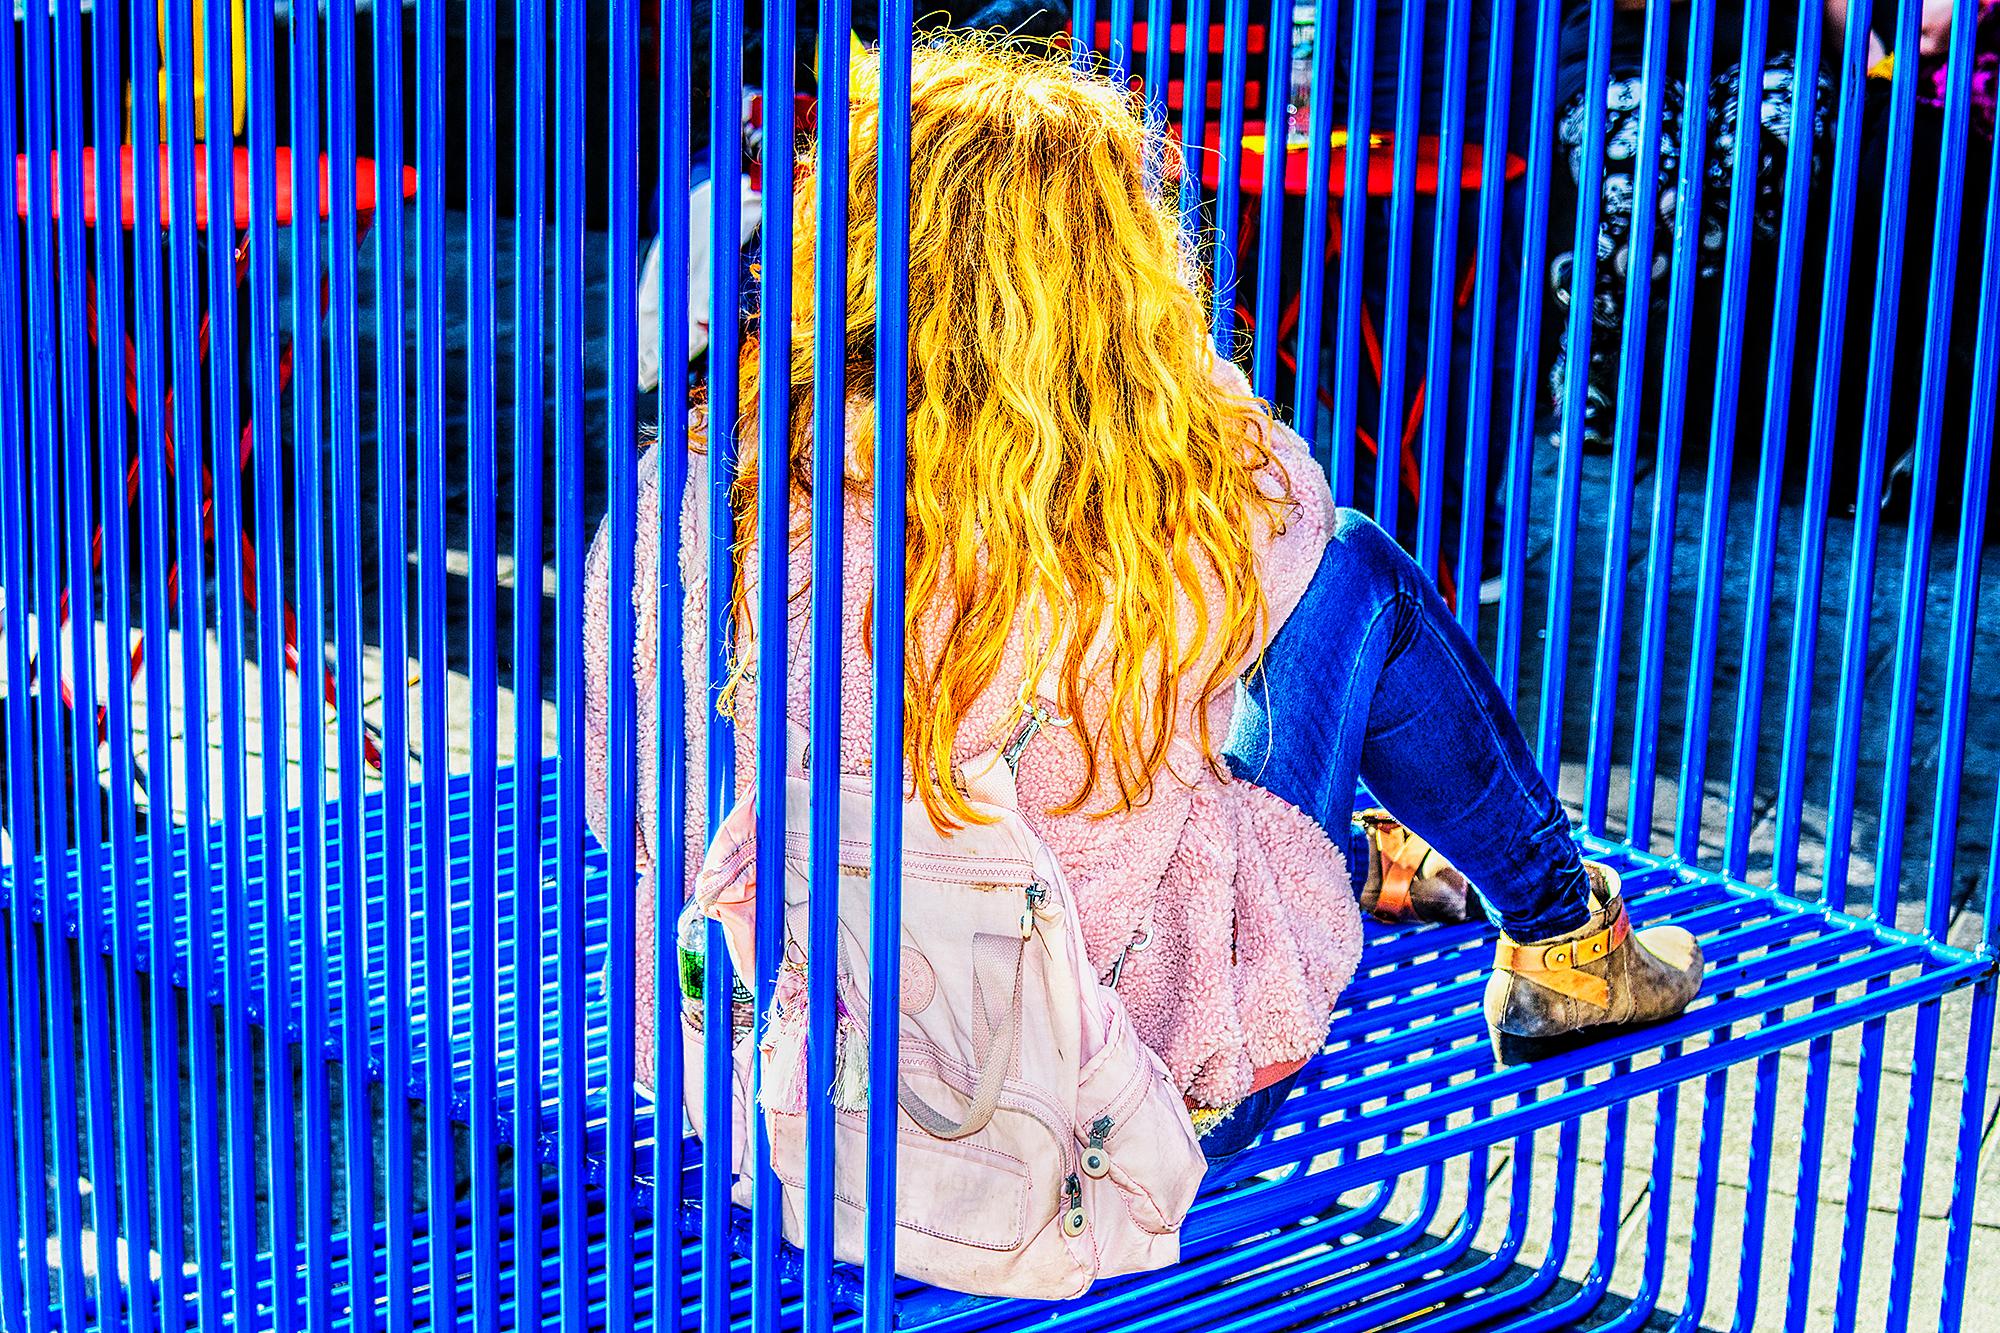 Mitchell Funk Color Photograph - Yellow Girl in Blue Bars